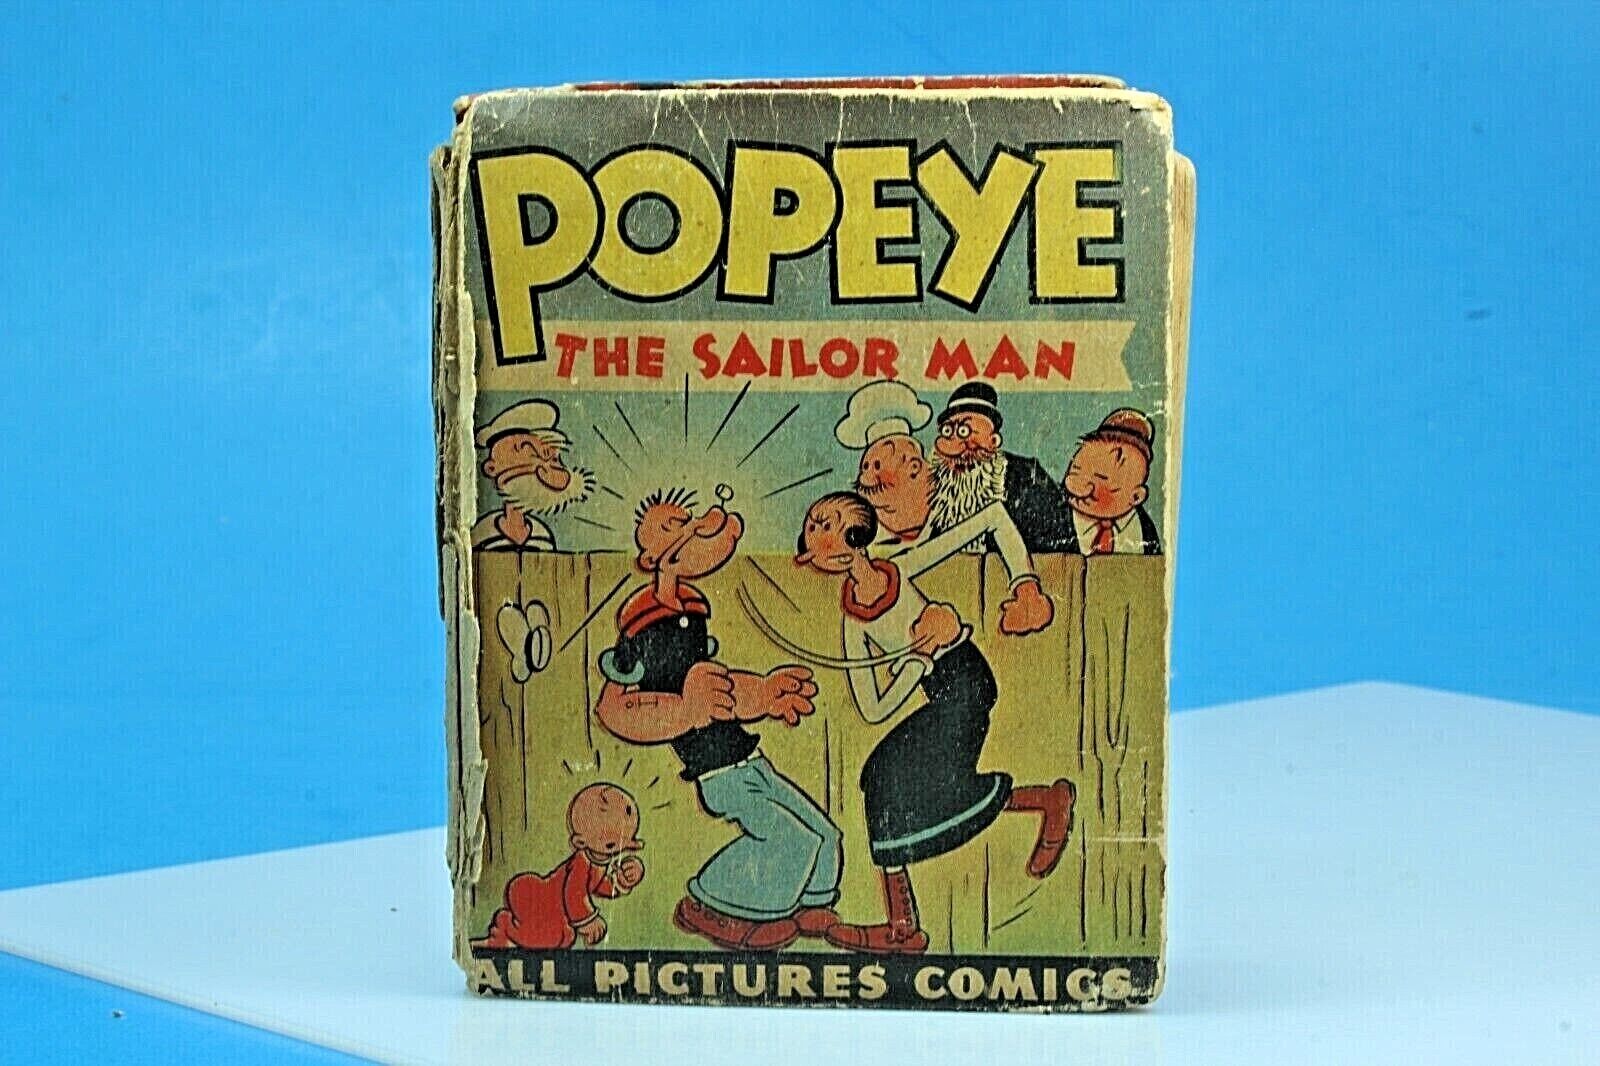 1947 Better Little Book POPEYE The Sailor Man # 1422 All Pictures Comics Book.